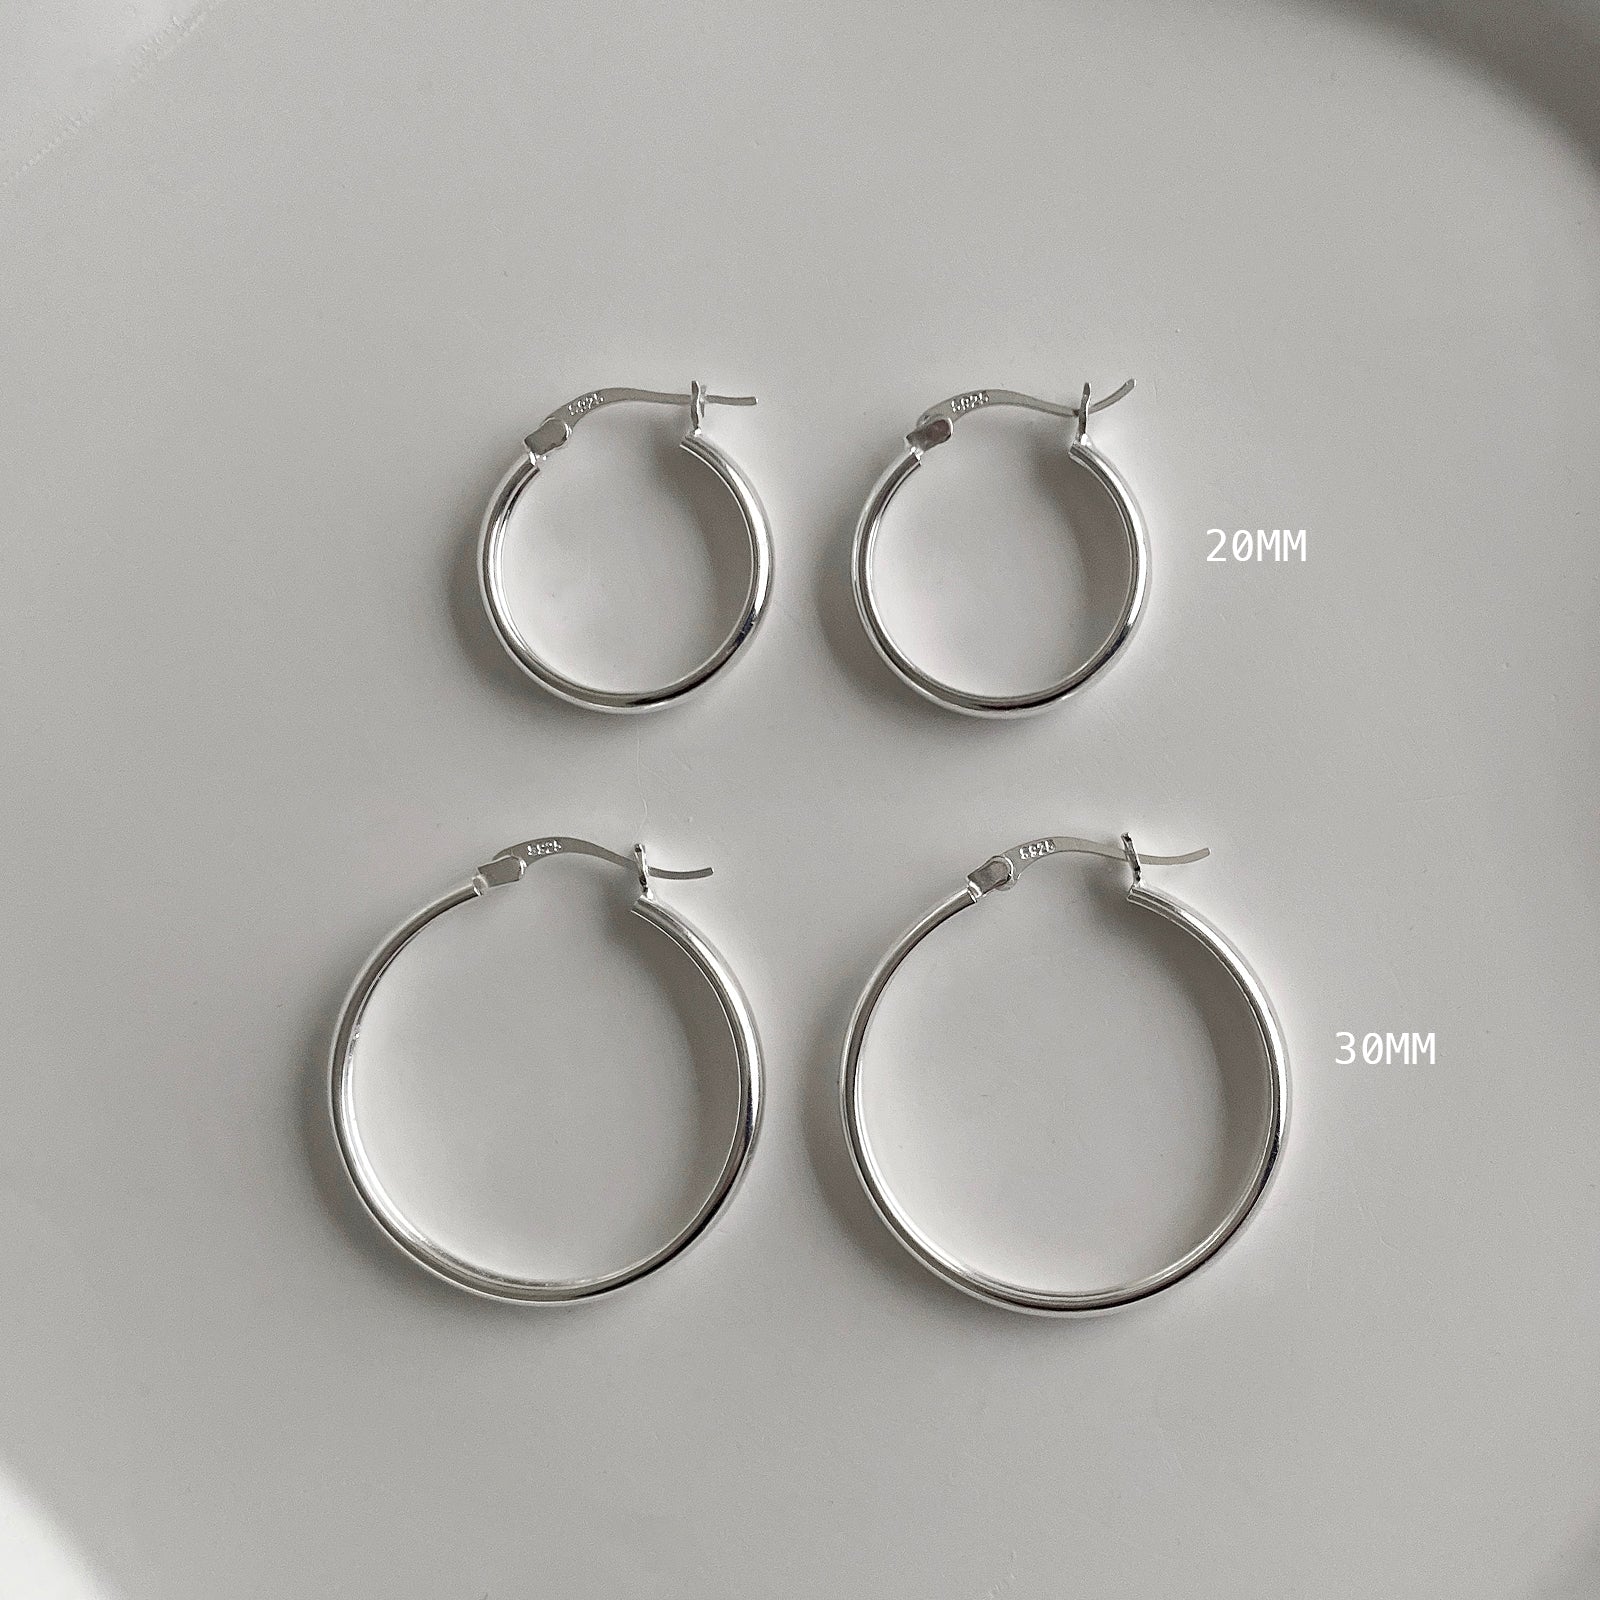 Jane Hoops come in 2 different sizes: 20mm and 30mm